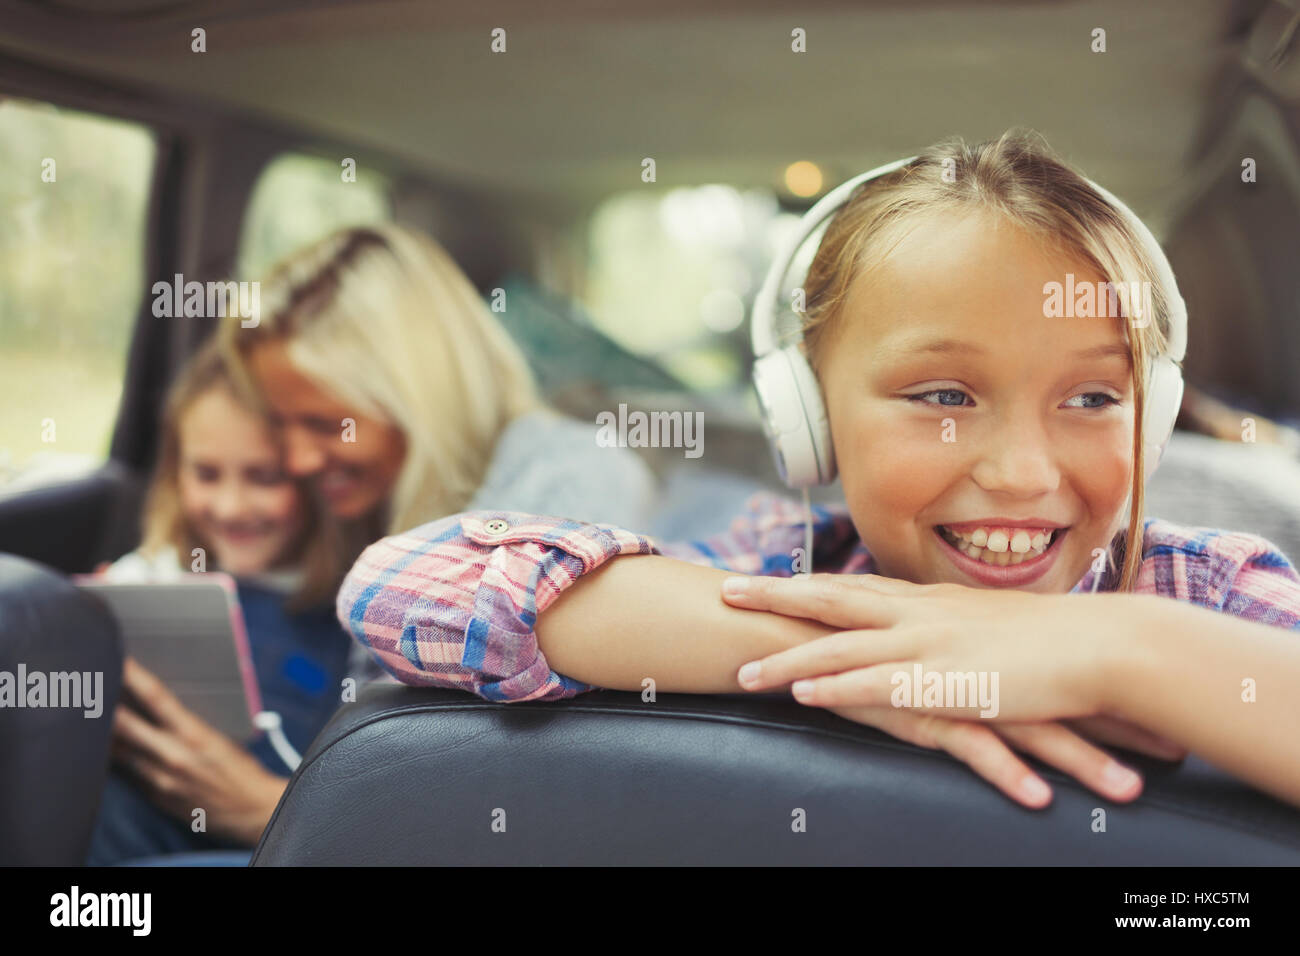 Smiling girl listening to music with headphones in back seat of car Stock Photo